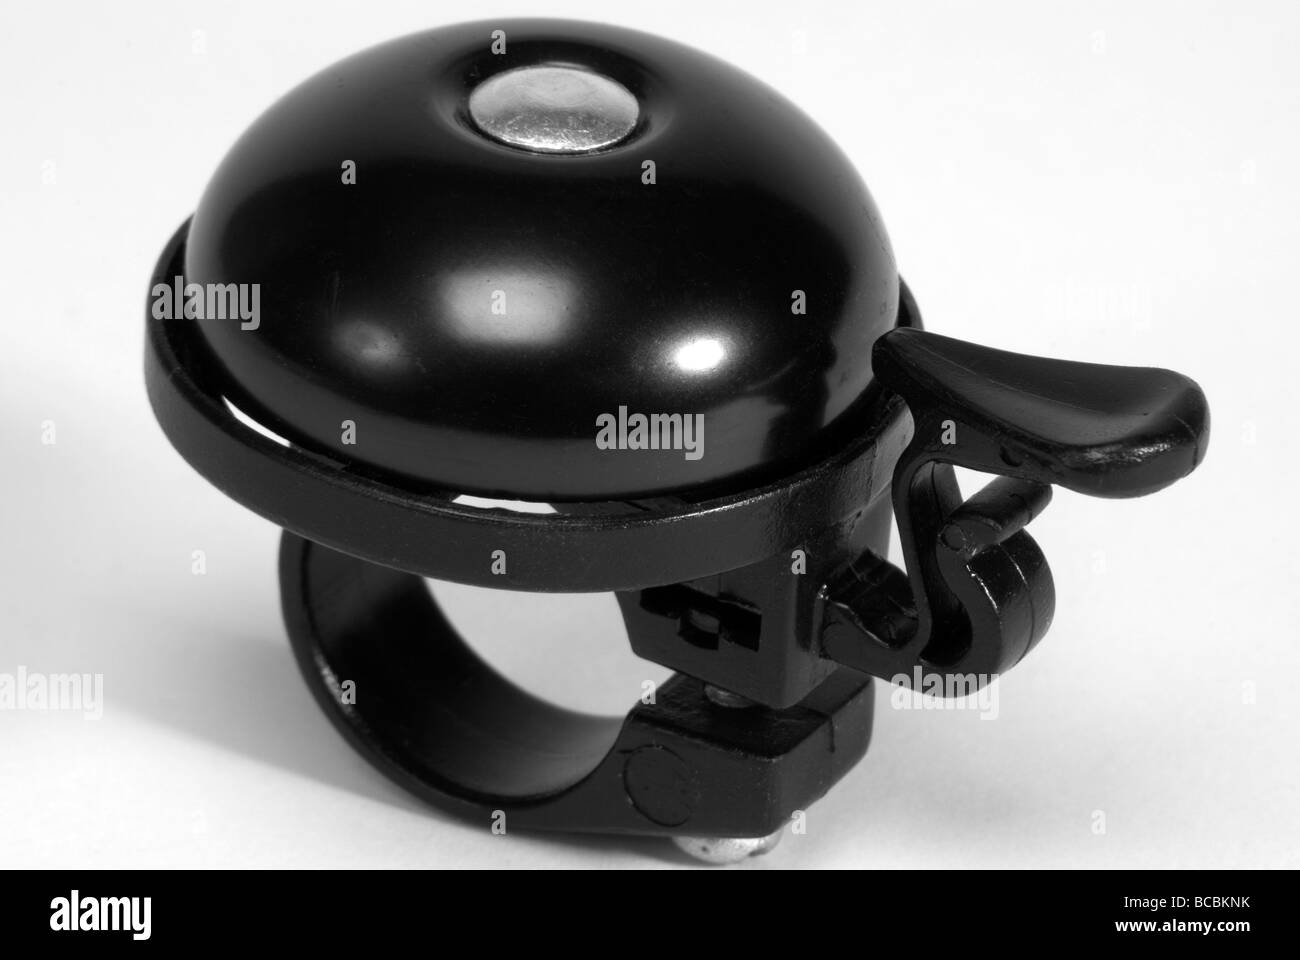 Cheap bicycle bell Stock Photo - Alamy